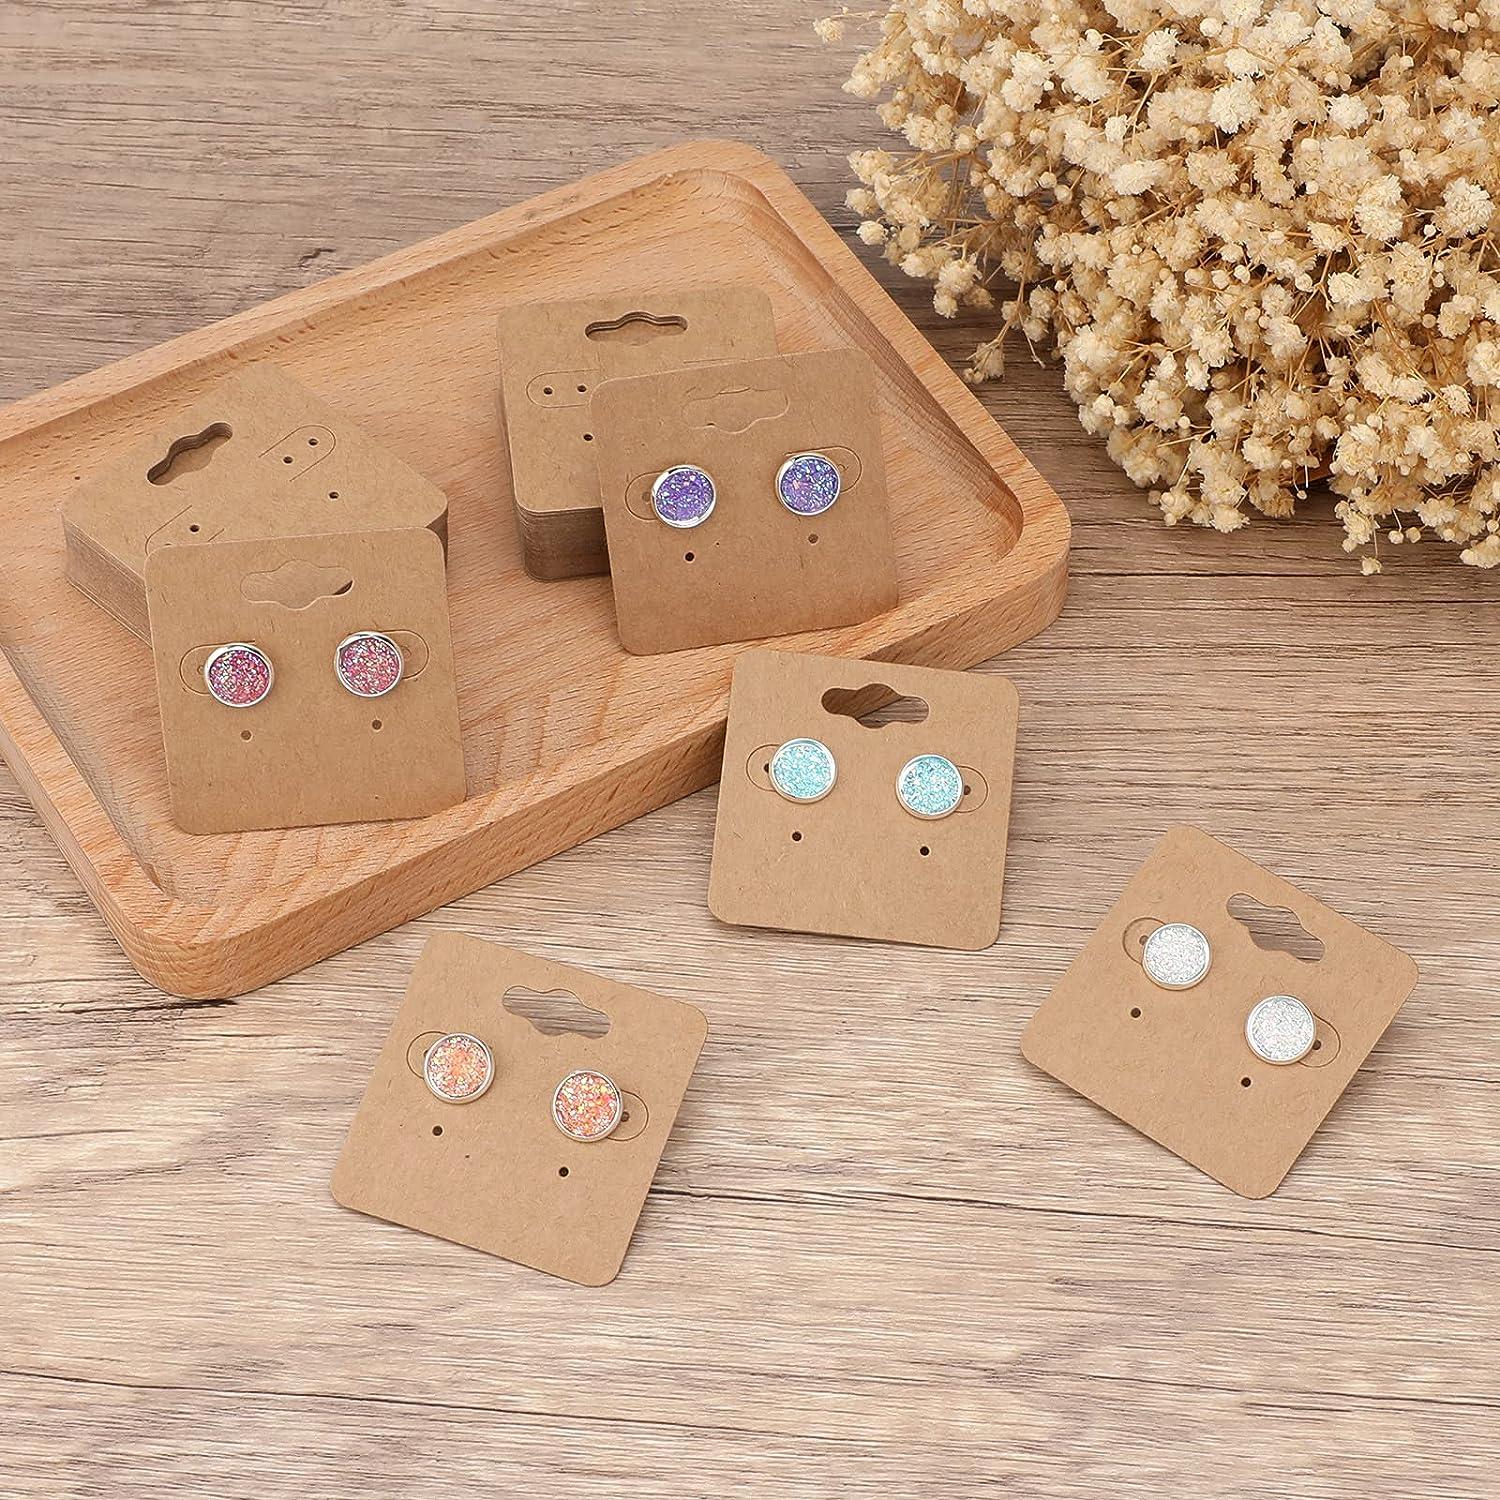 joycraft 100Pcs Kraft Earring Cards Necklace Display Cards,Brown Paper Ear  Studs Display Cards,Personalized Jewelry Cards for Selling,Hanging Earring